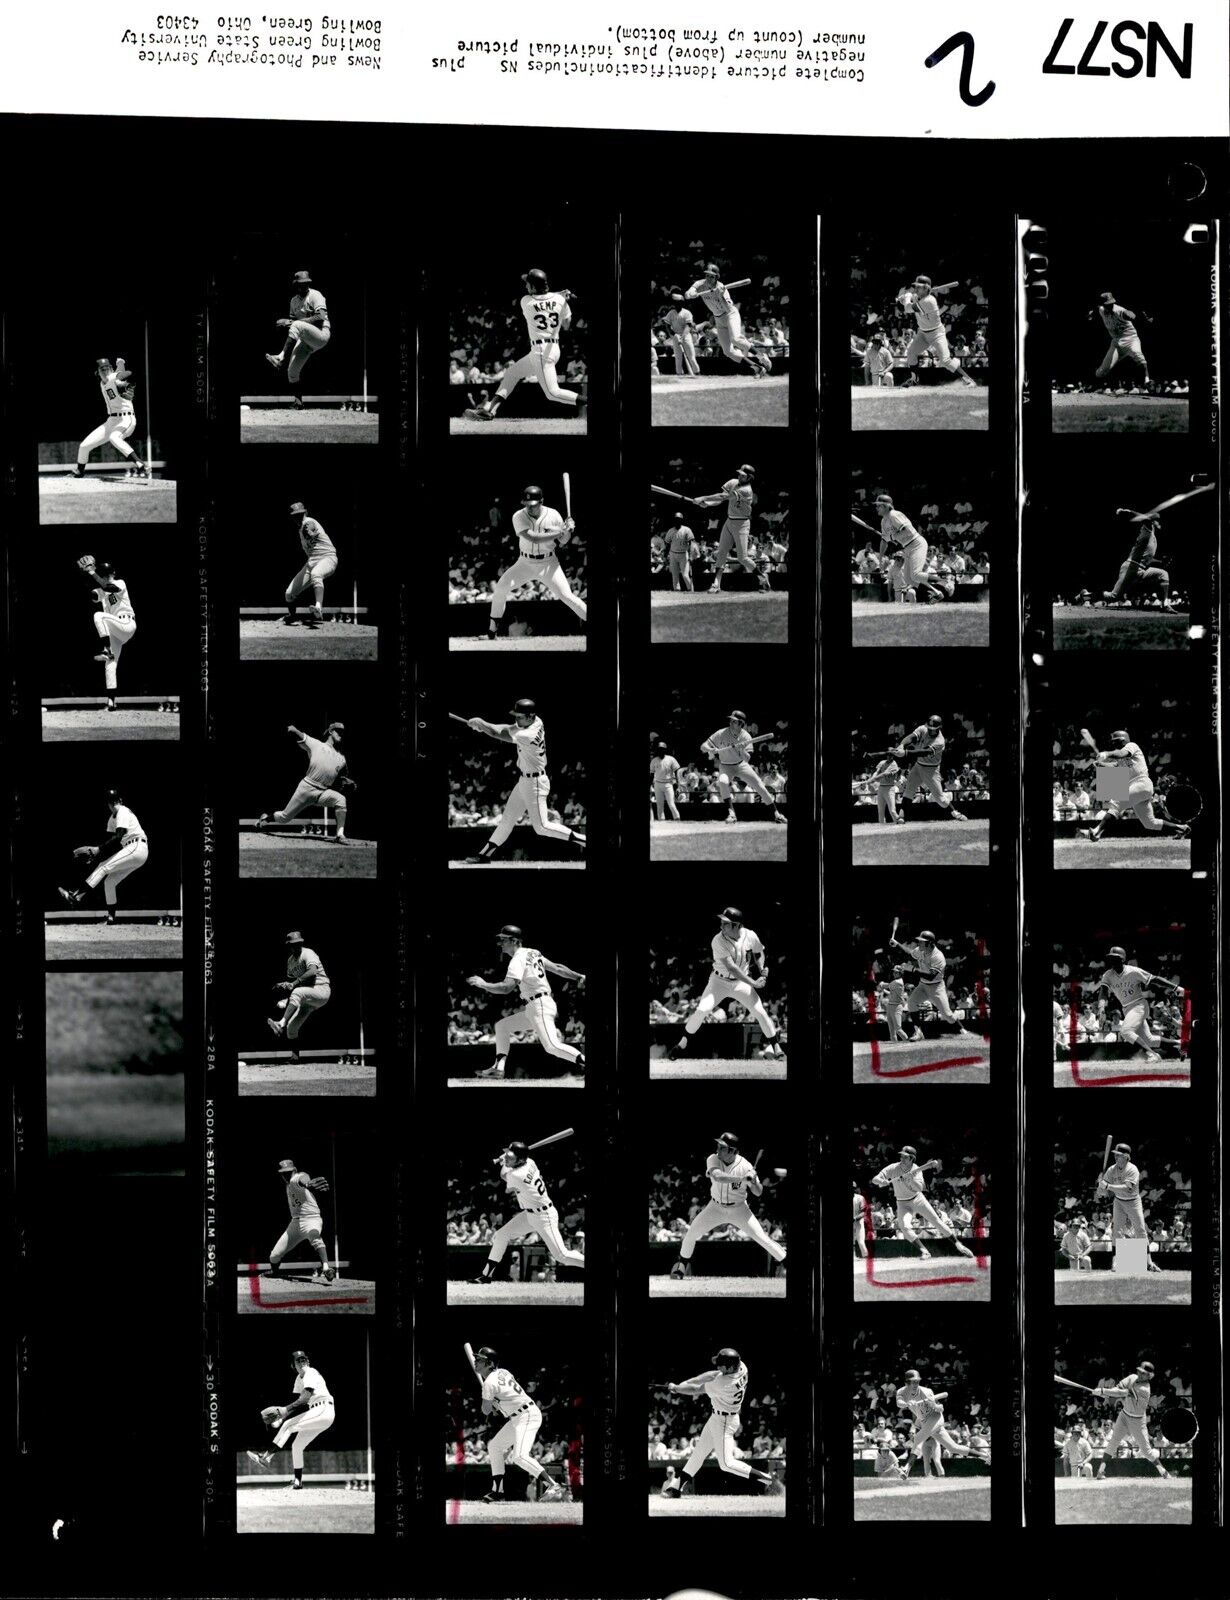 LD361 1977 Orig Contact Sheet Photo DETROIT TIGERS SEATTLE MARINERS C. REYNOLDS